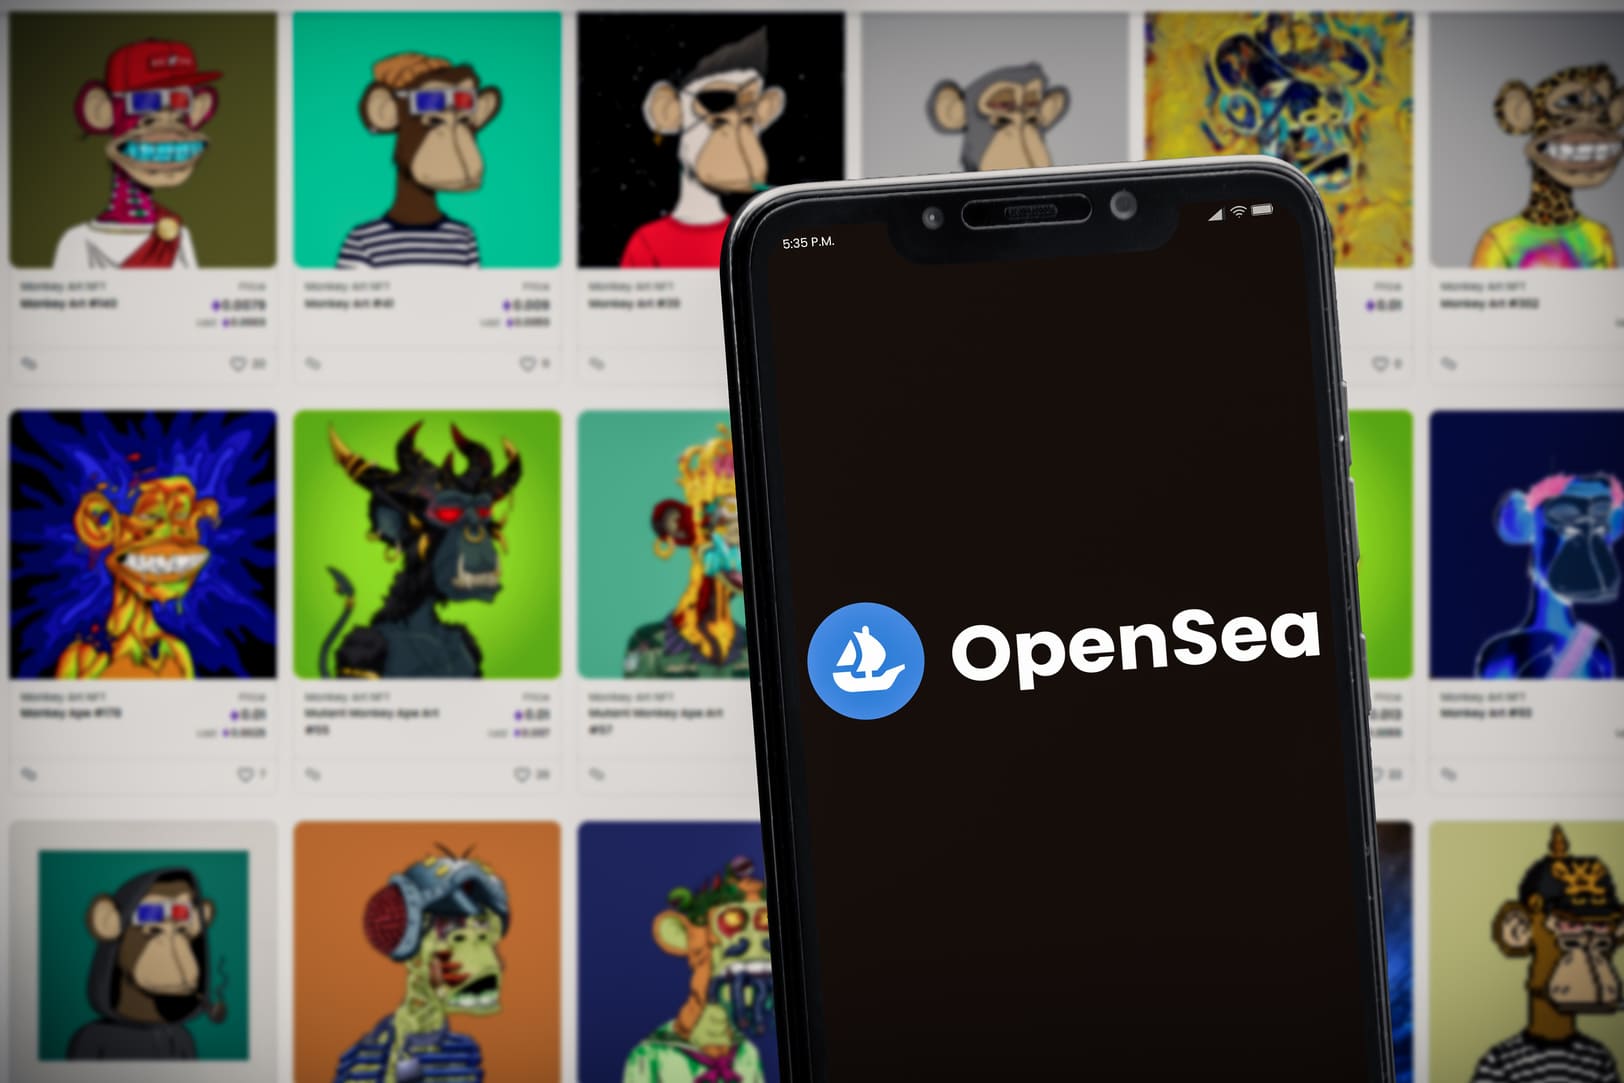 NFT marketplace OpenSea lays off 20% of its staff